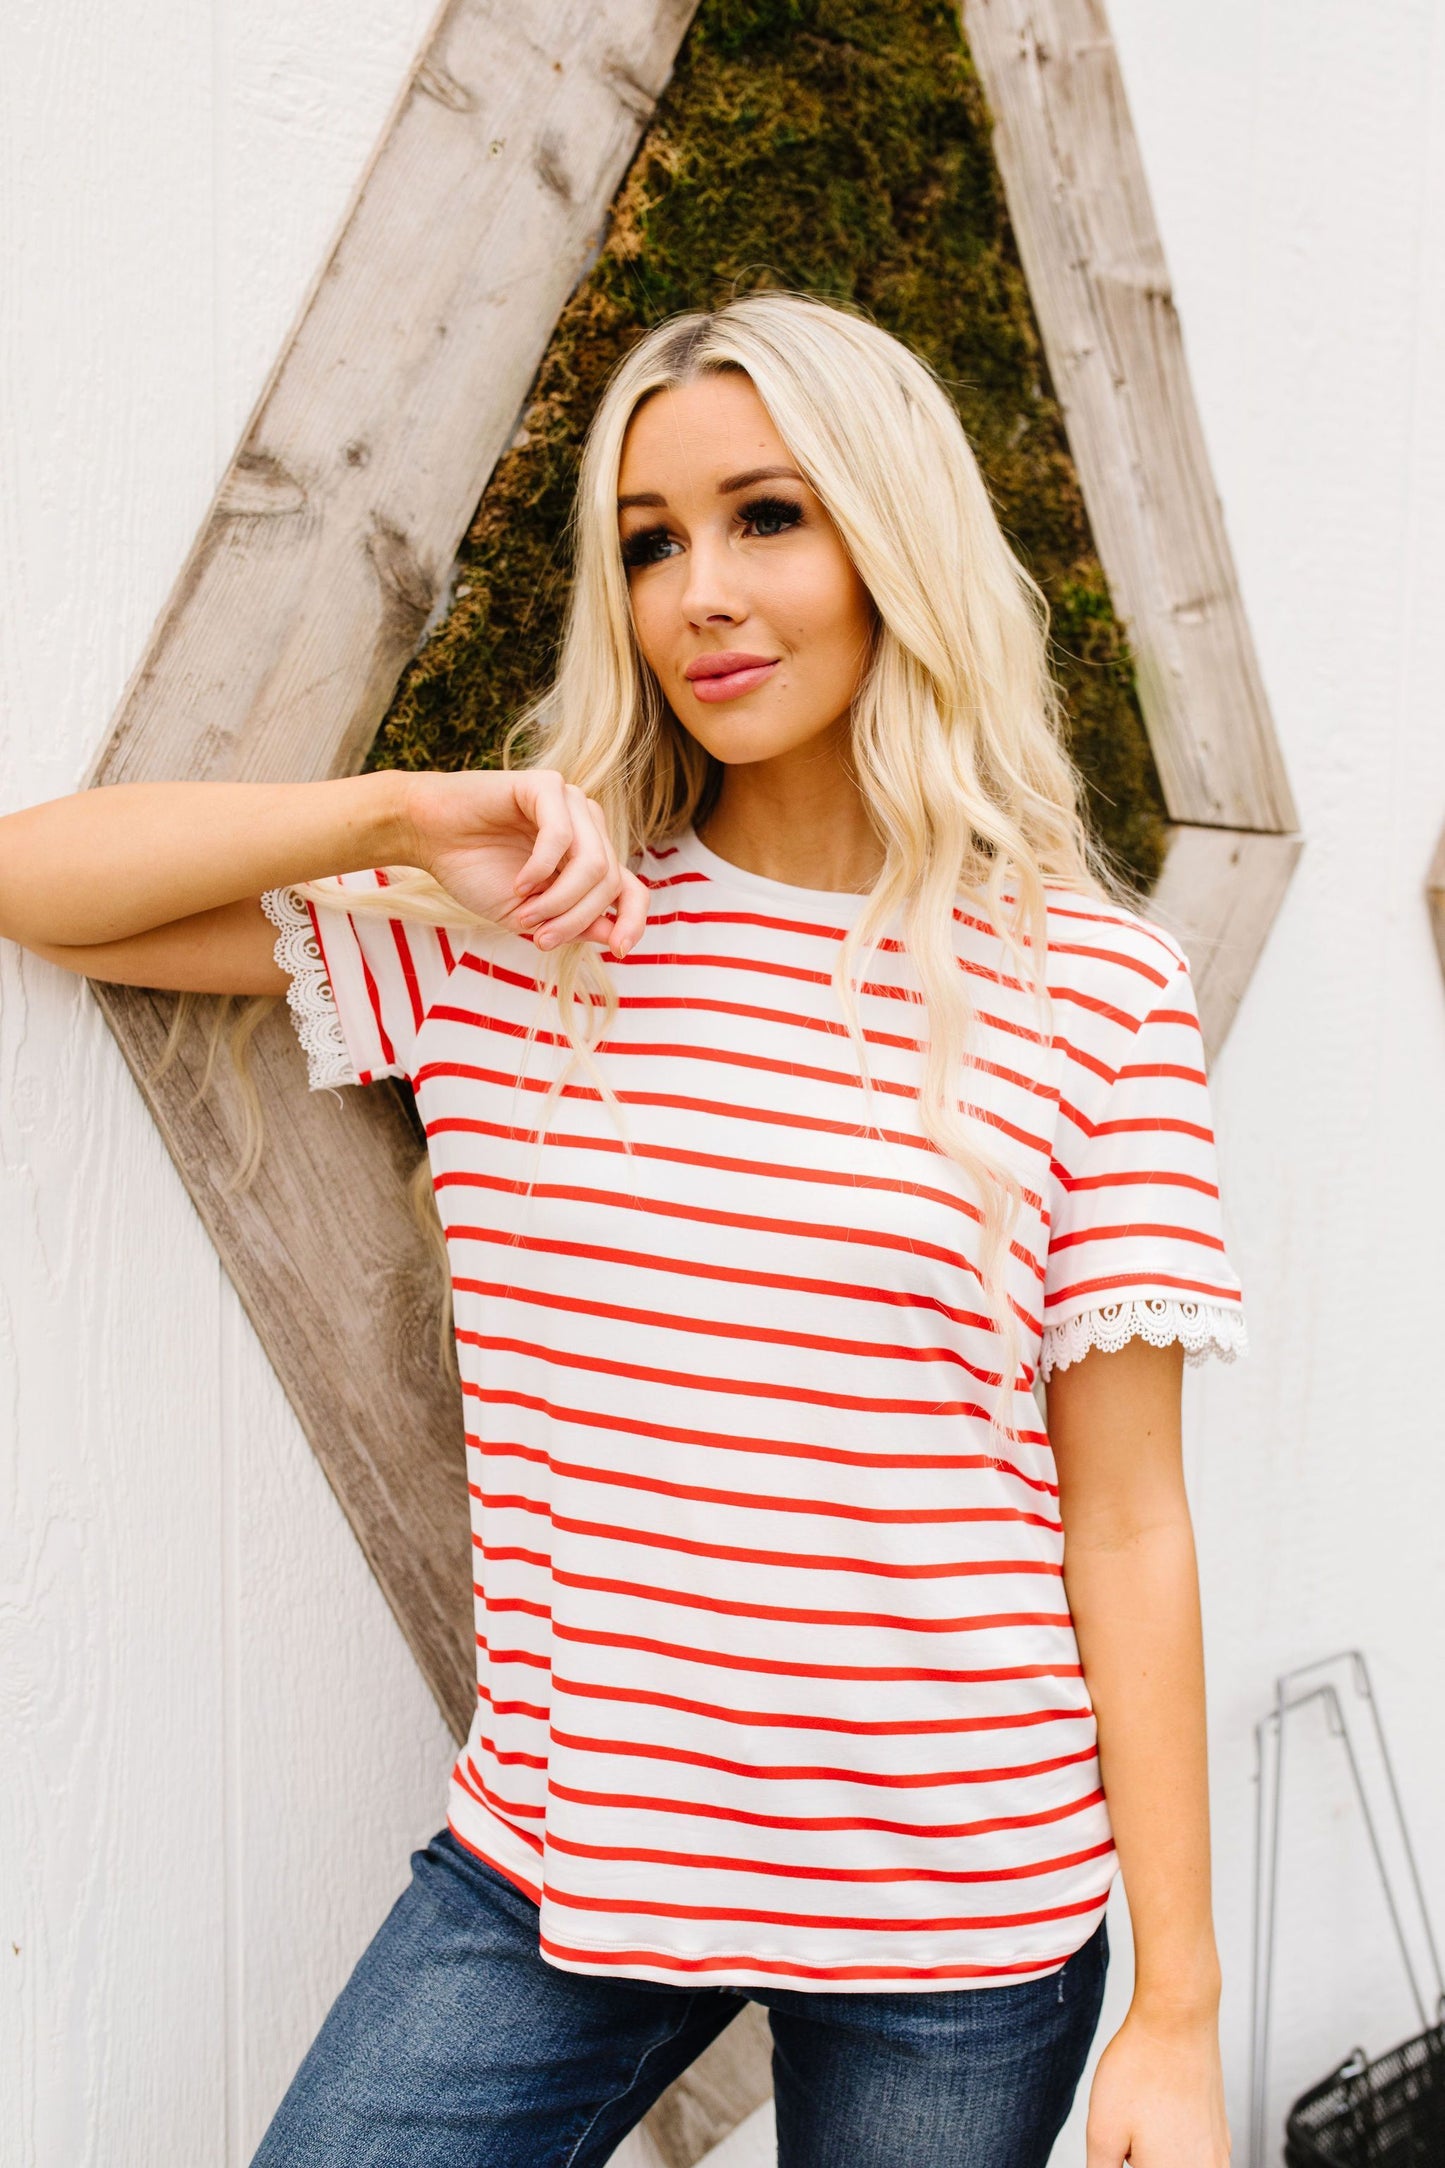 Sails To The Wind Top In Ivory & Red